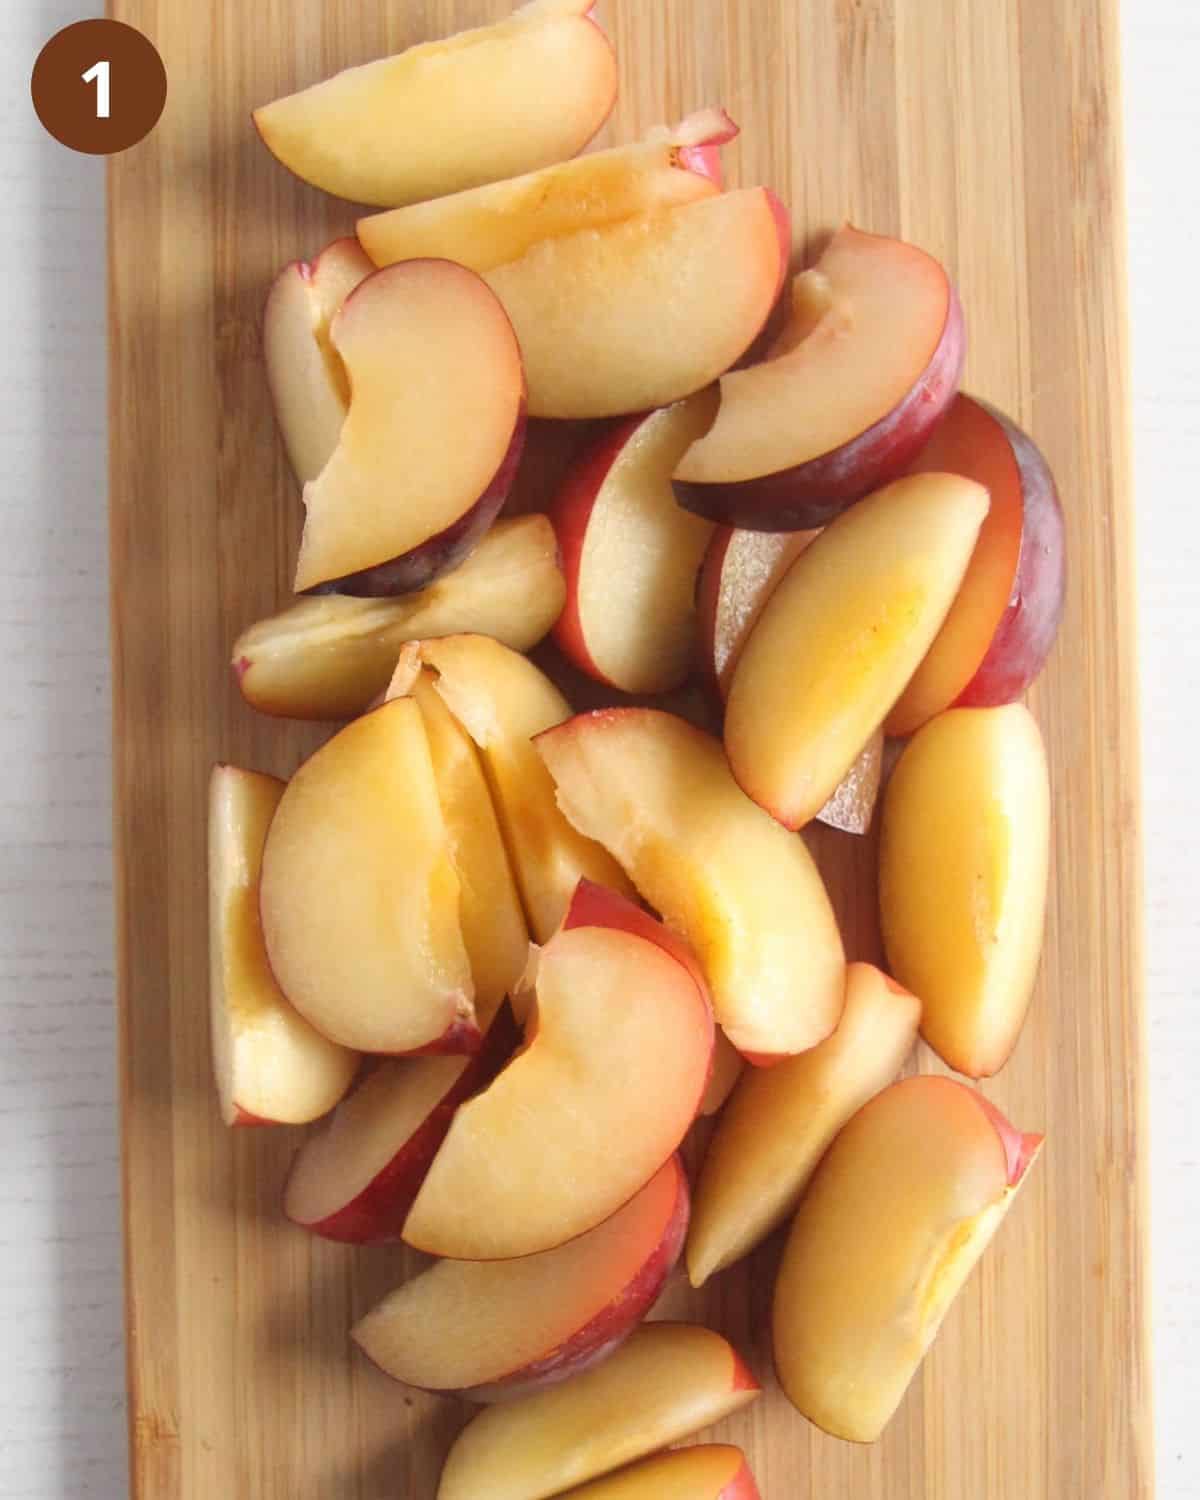 sliced plums on a wooden board.